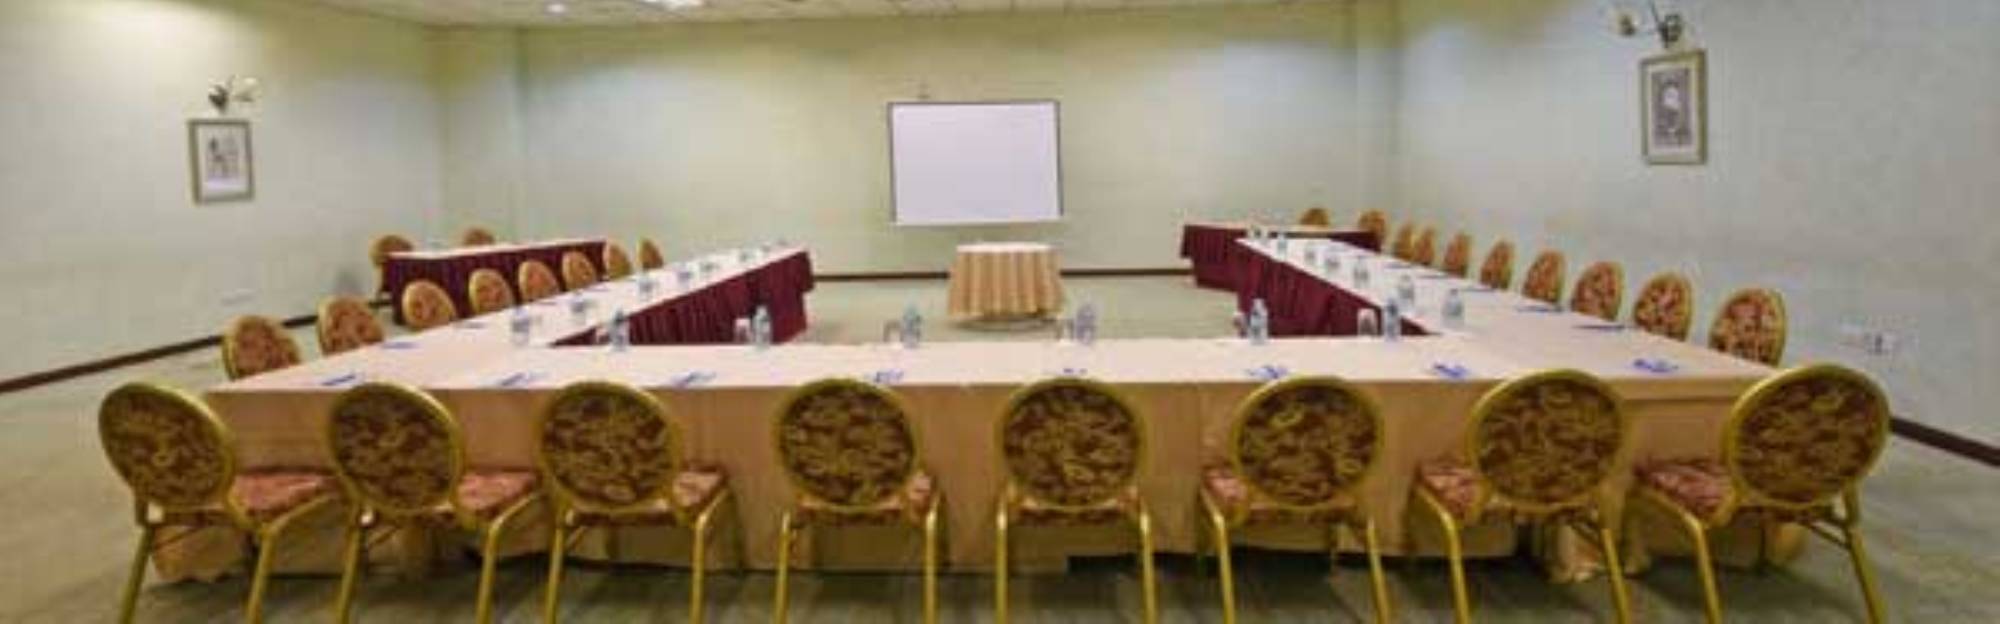 Imperial Royale Hotel Conferences